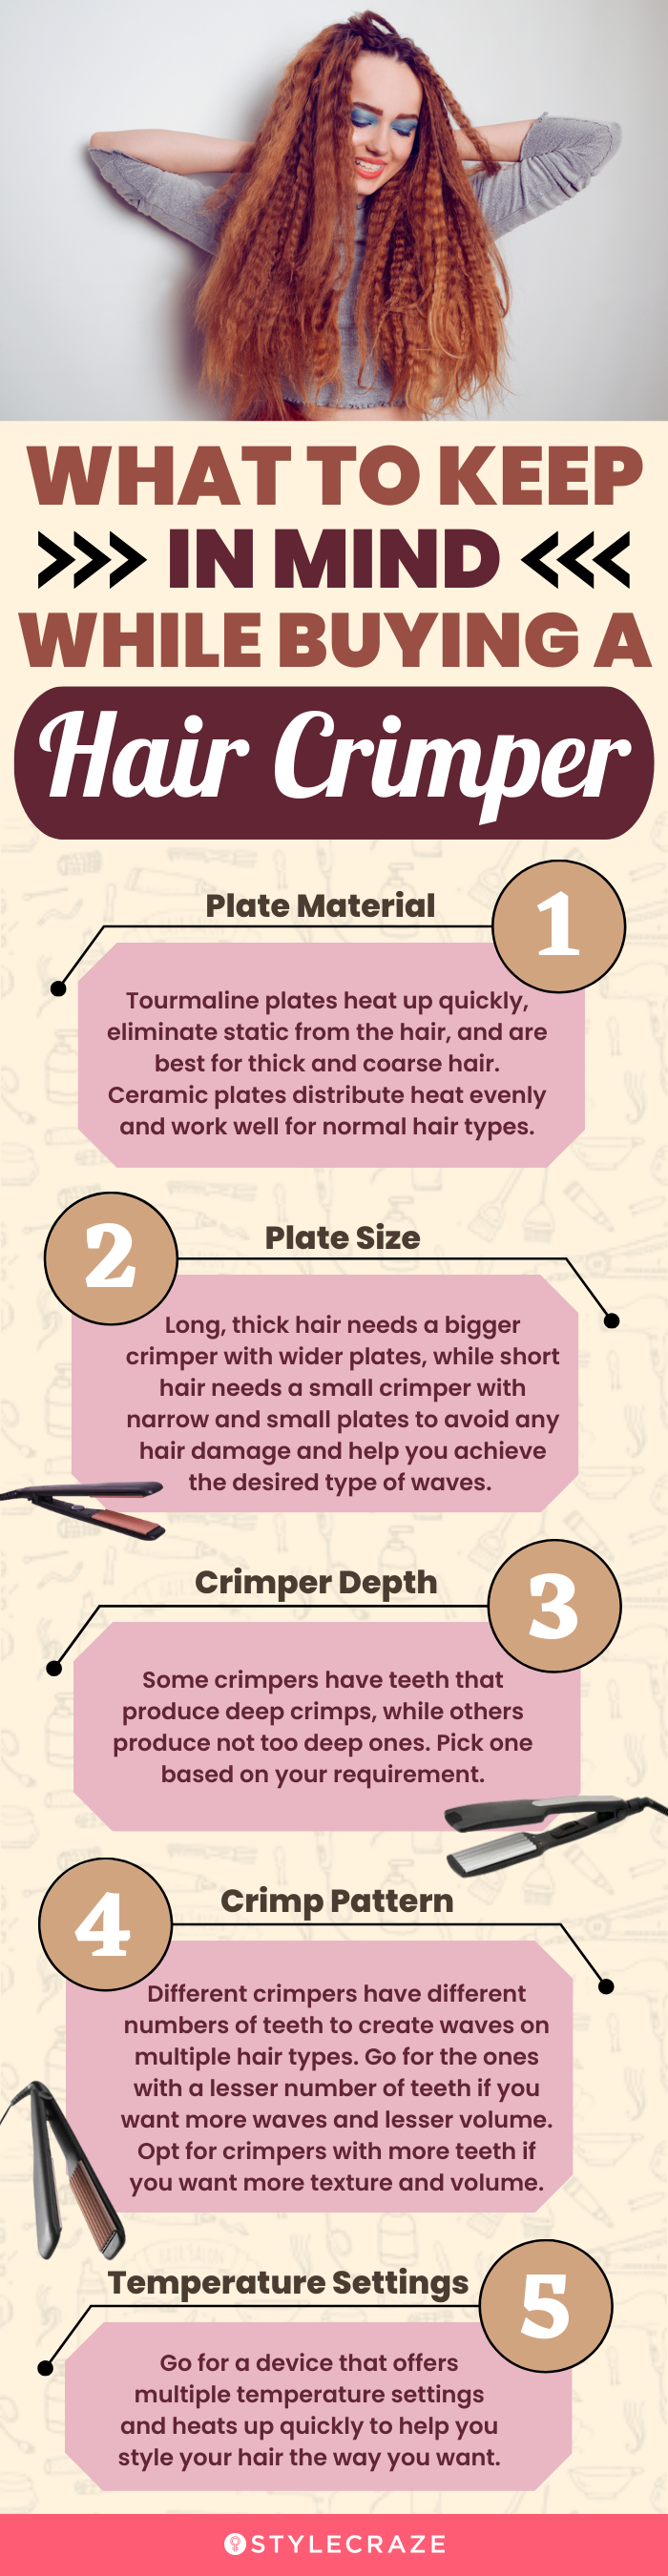 What To Keep In Mind While Buying A Hair Crimper (infographic)